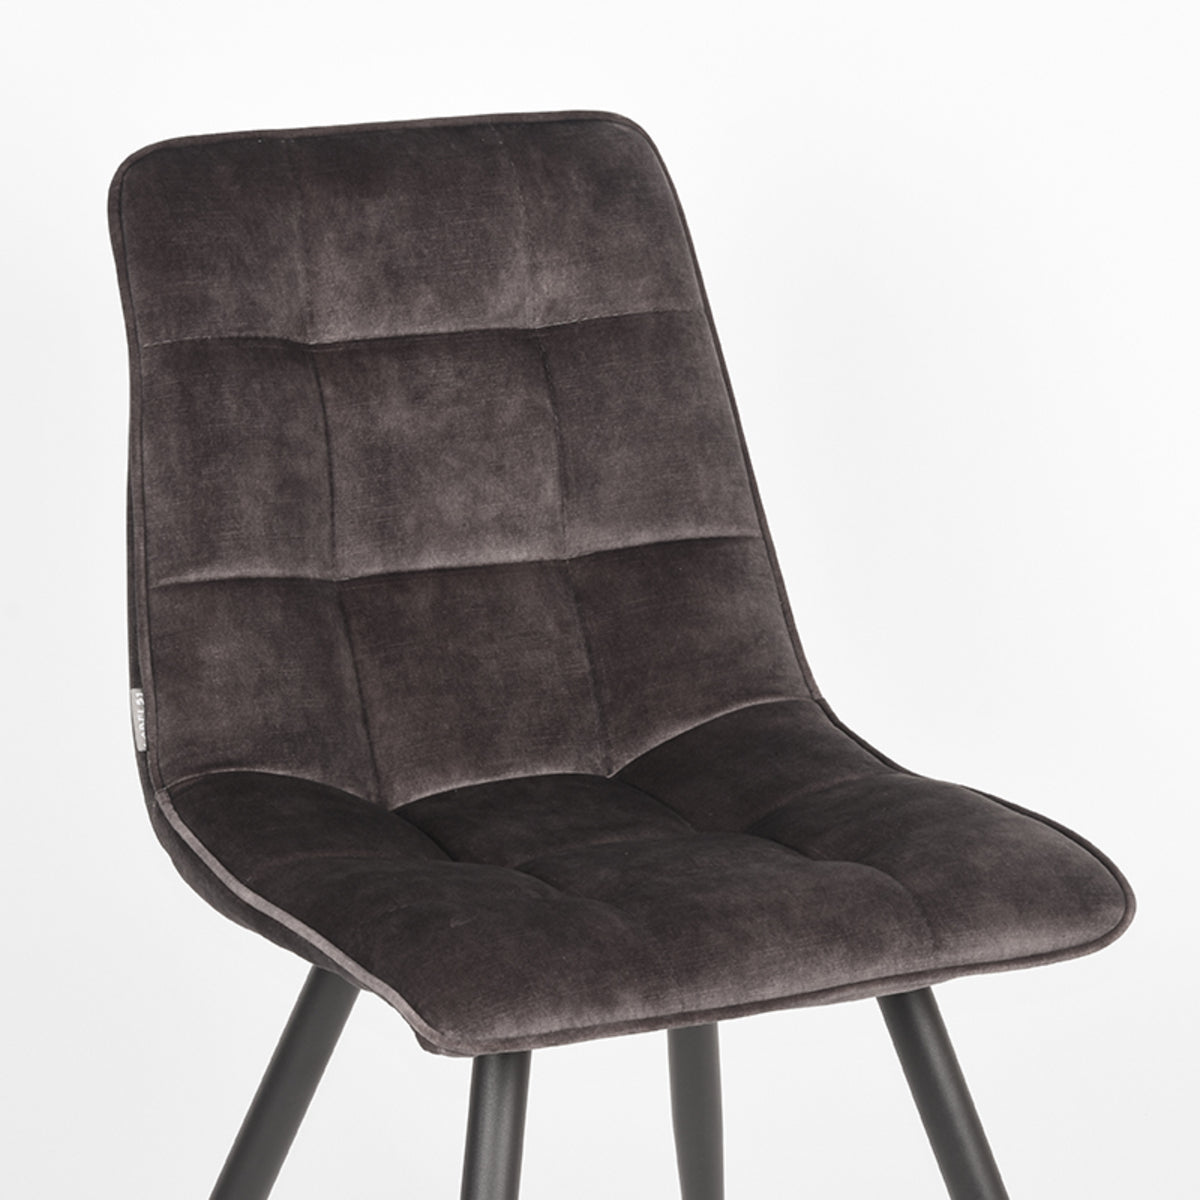 LABEL51 Dining room chair Jelt - Anthracite - Velours | 2 pieces